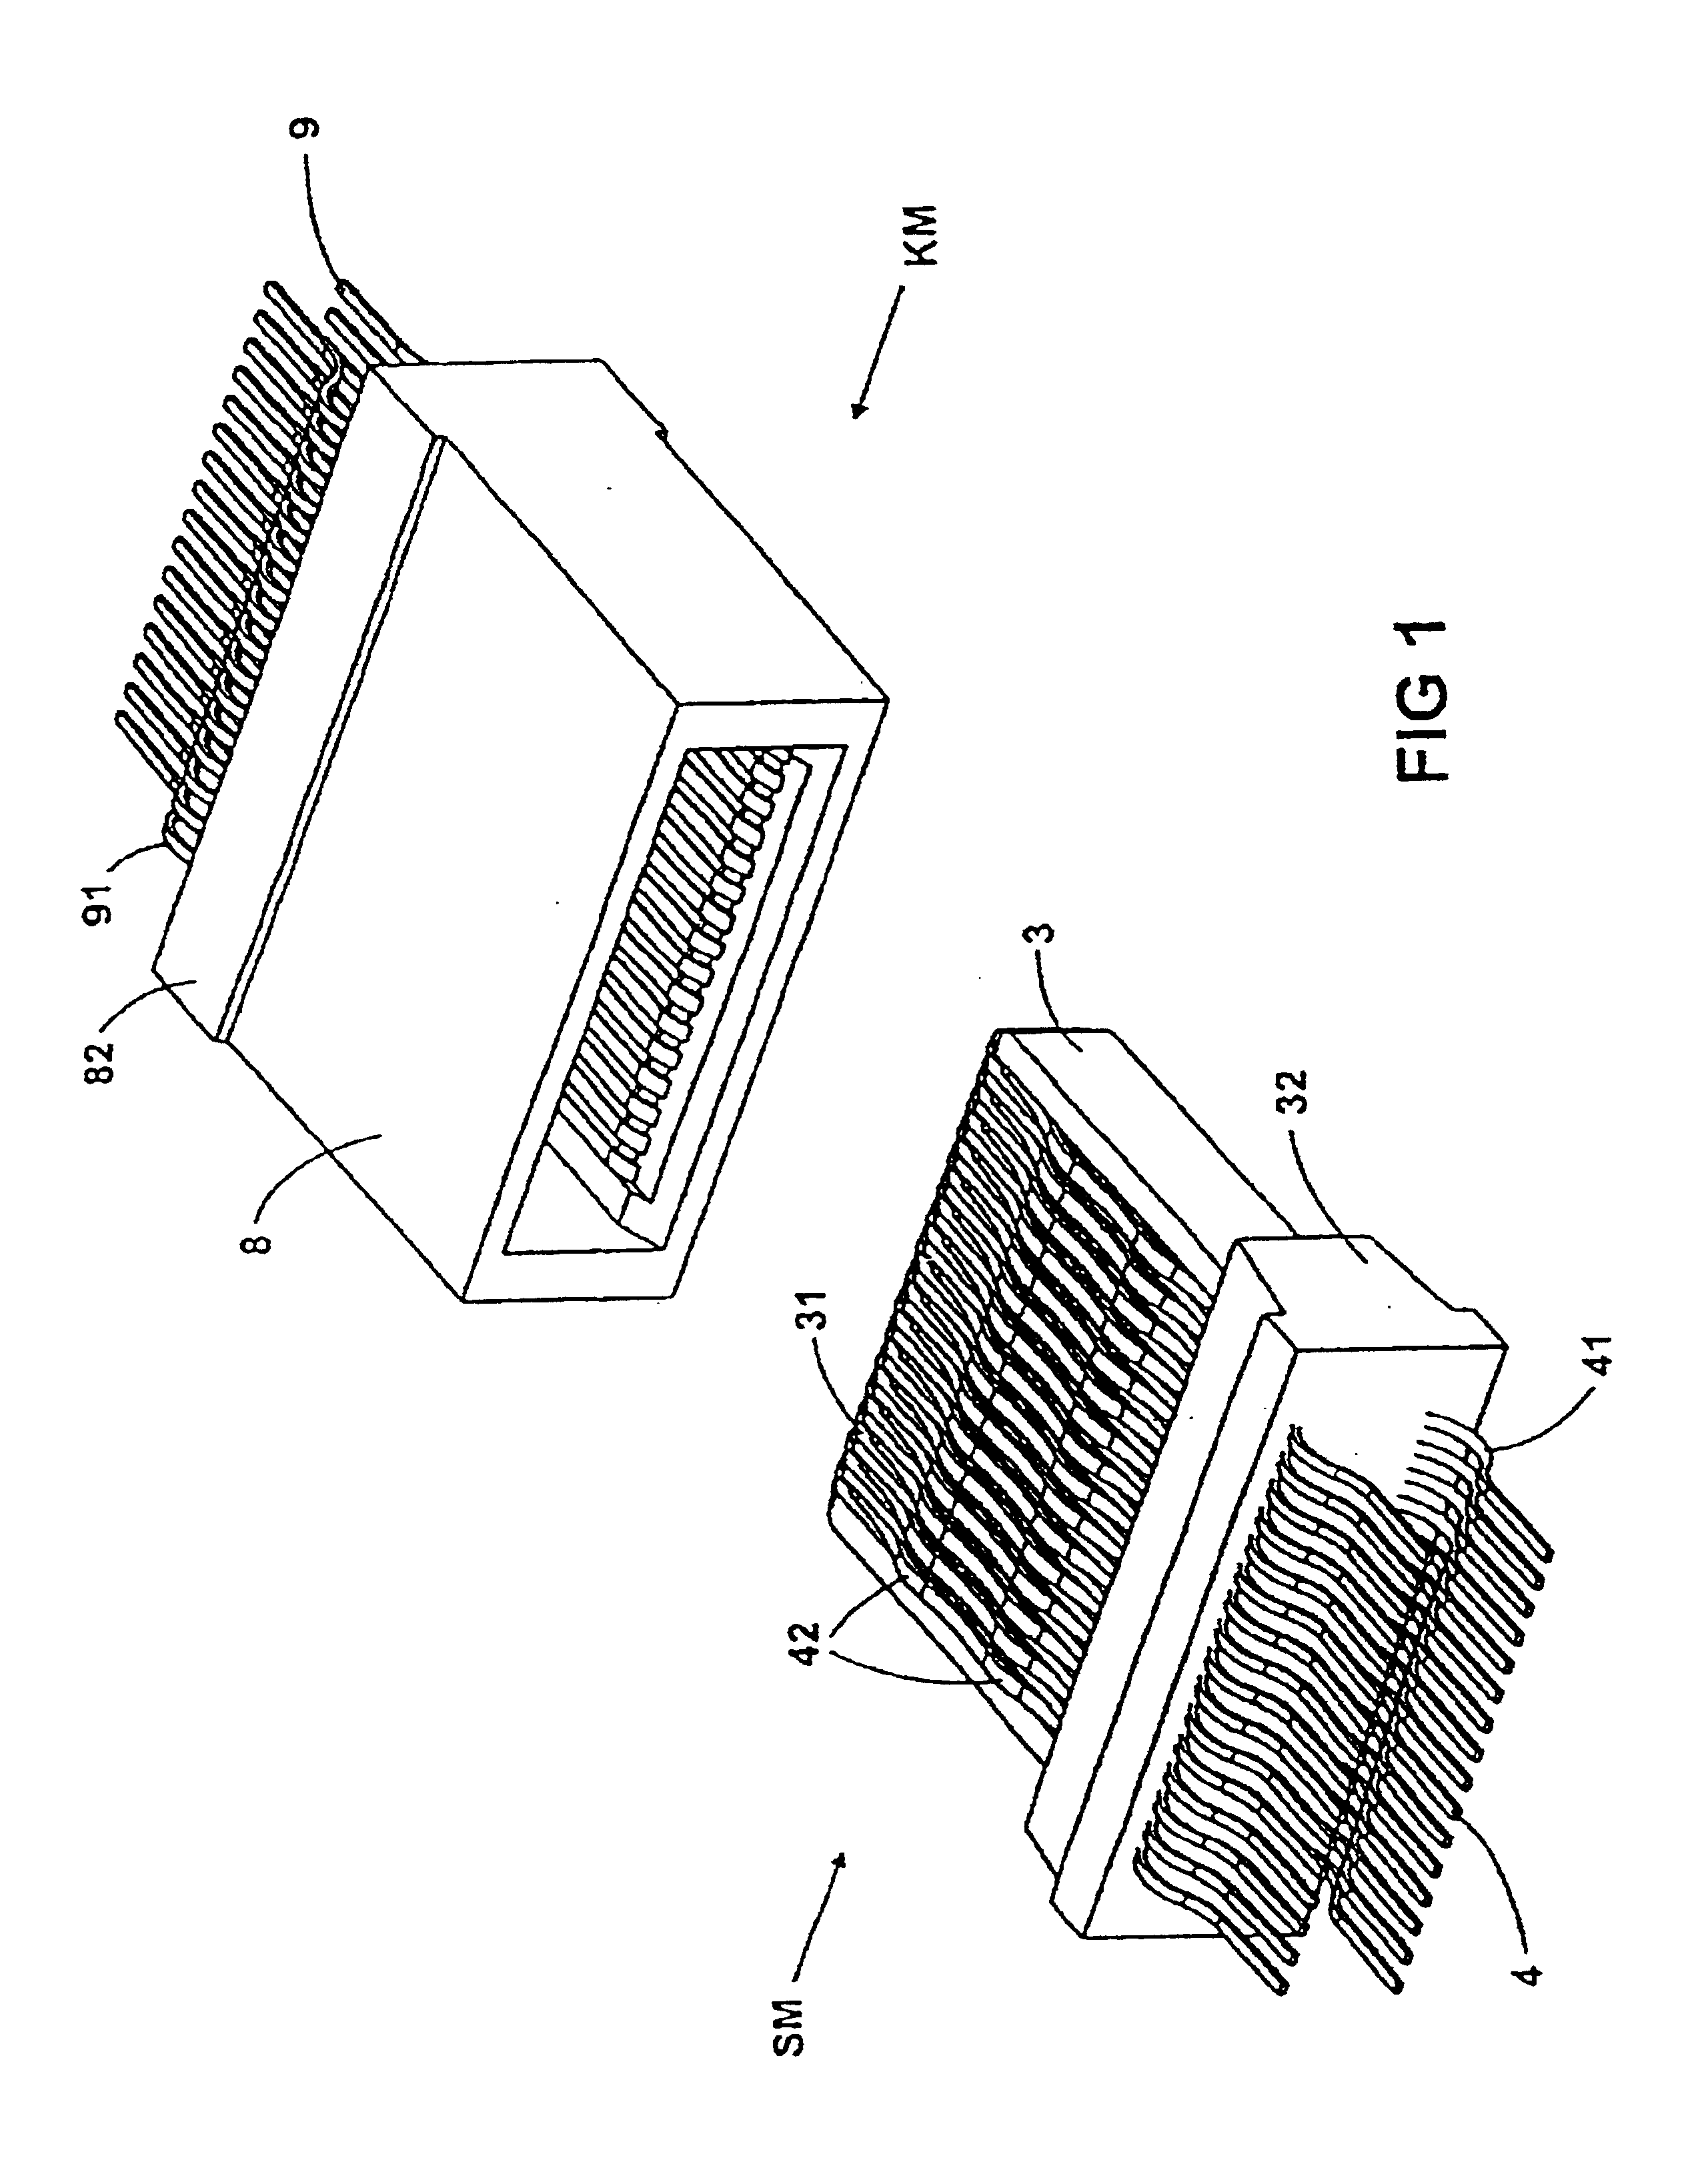 Electrical connector assembly with moveable contact elements